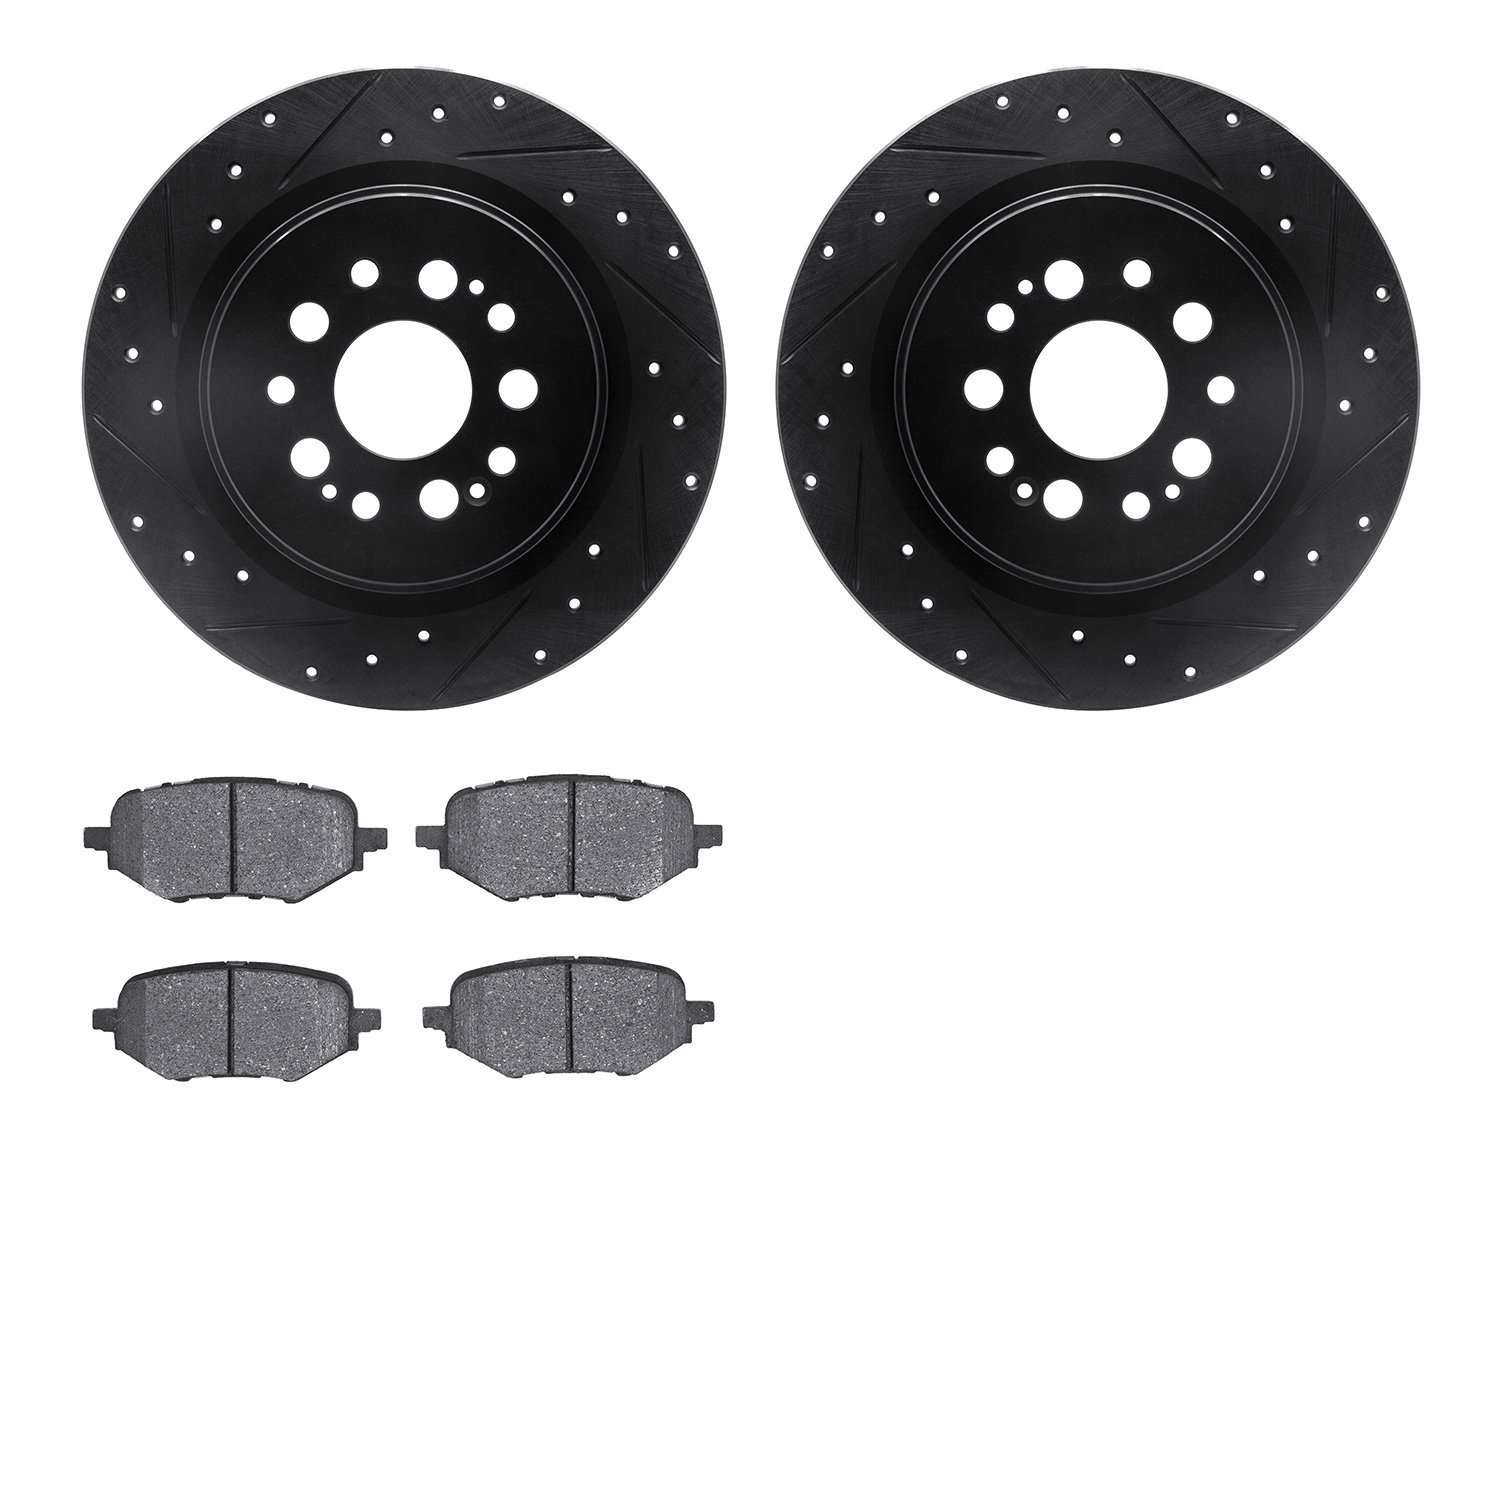 8302-59116 Drilled/Slotted Brake Rotors with 3000-Series Ceramic Brake Pads Kit [Black], Fits Select Acura/Honda, Position: Rear